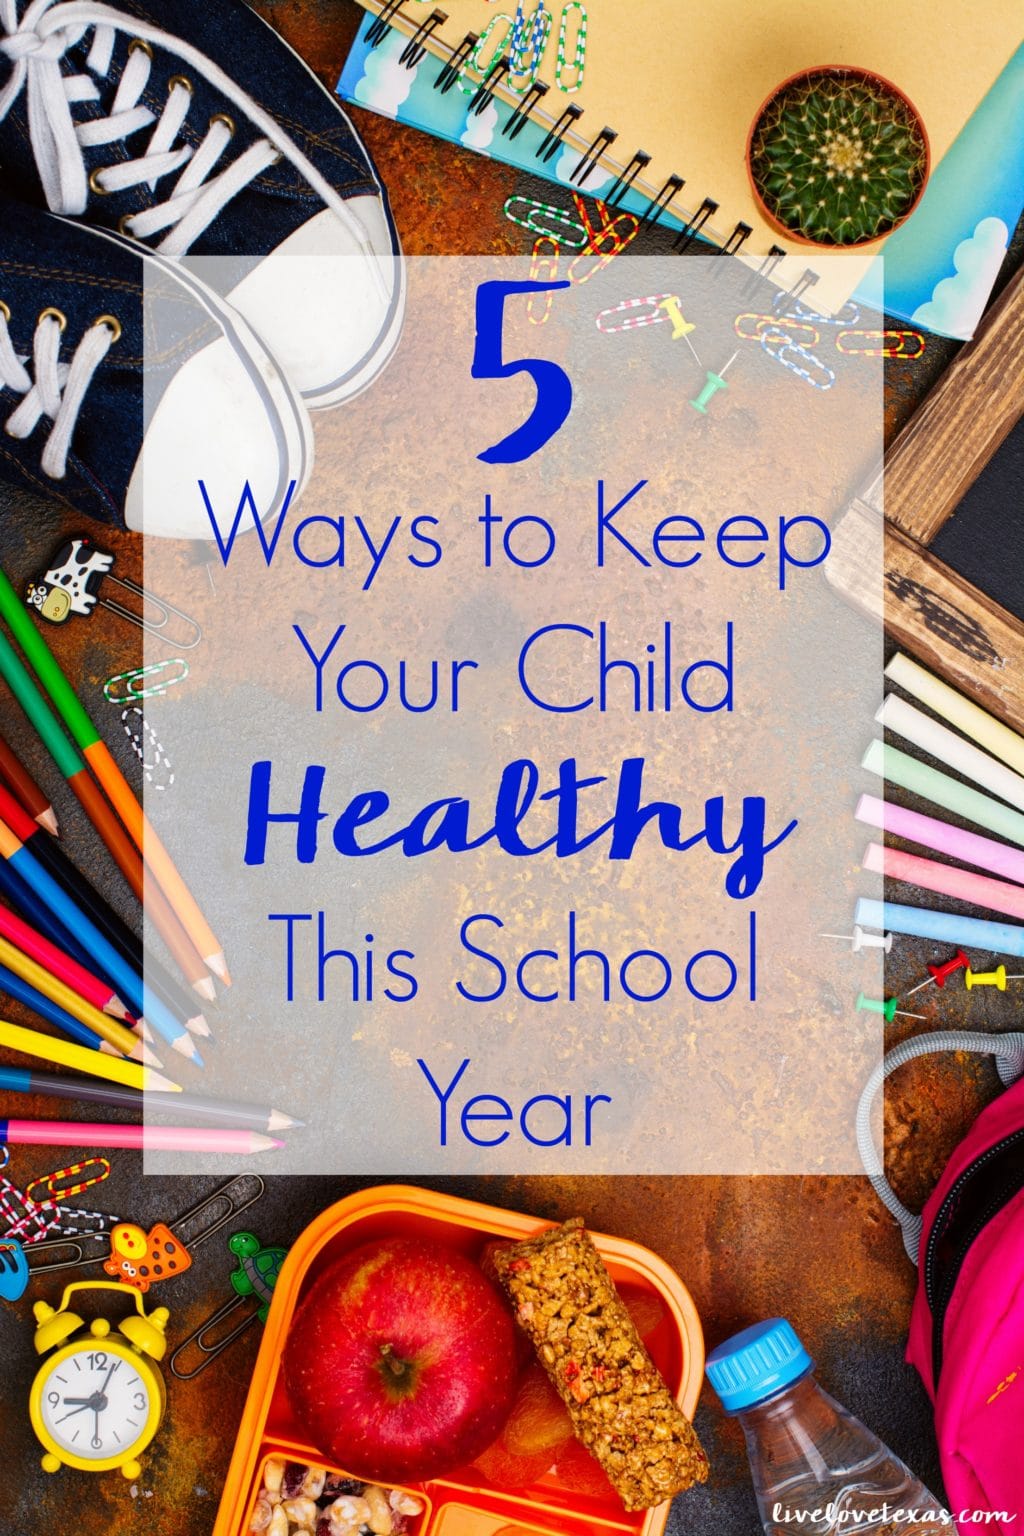 Avoid absences and unnecessary sickies with these 5 Ways to Keep Your Child Healthy This School Year. Preemptive moves to keep germs away!